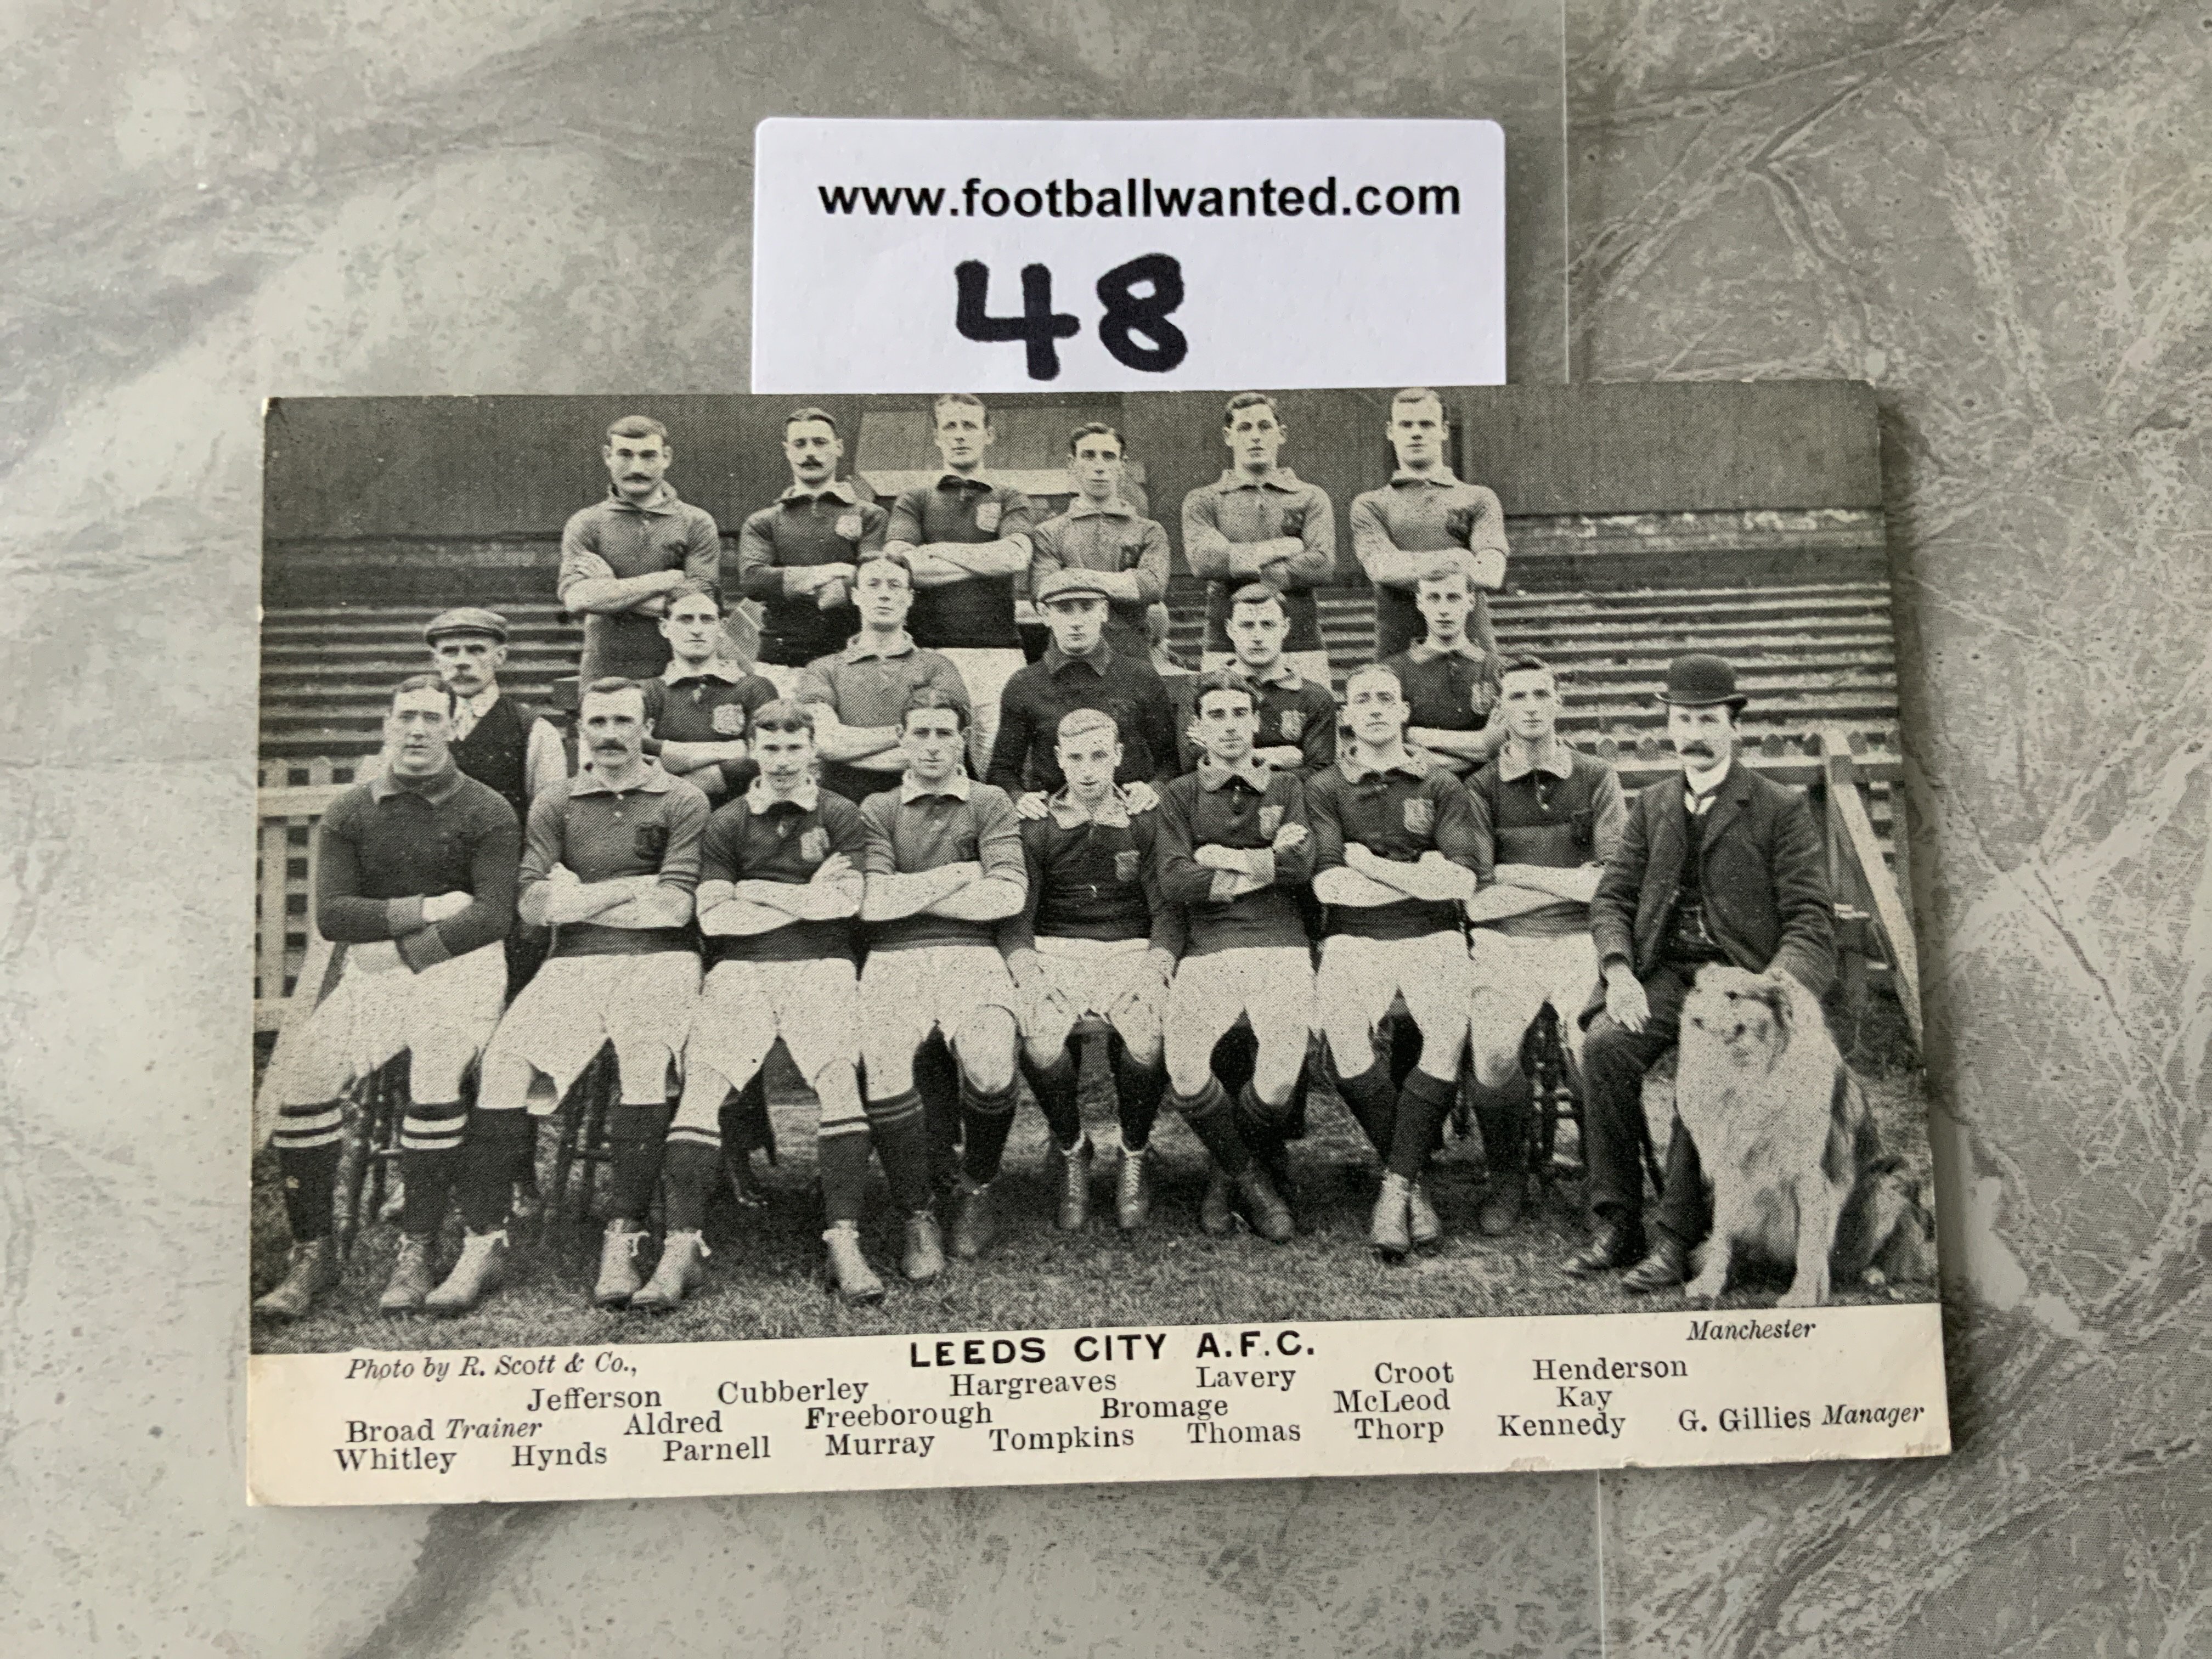 Leeds City 1907 Football Team Postcard: Excellent condition with no writing to rear.